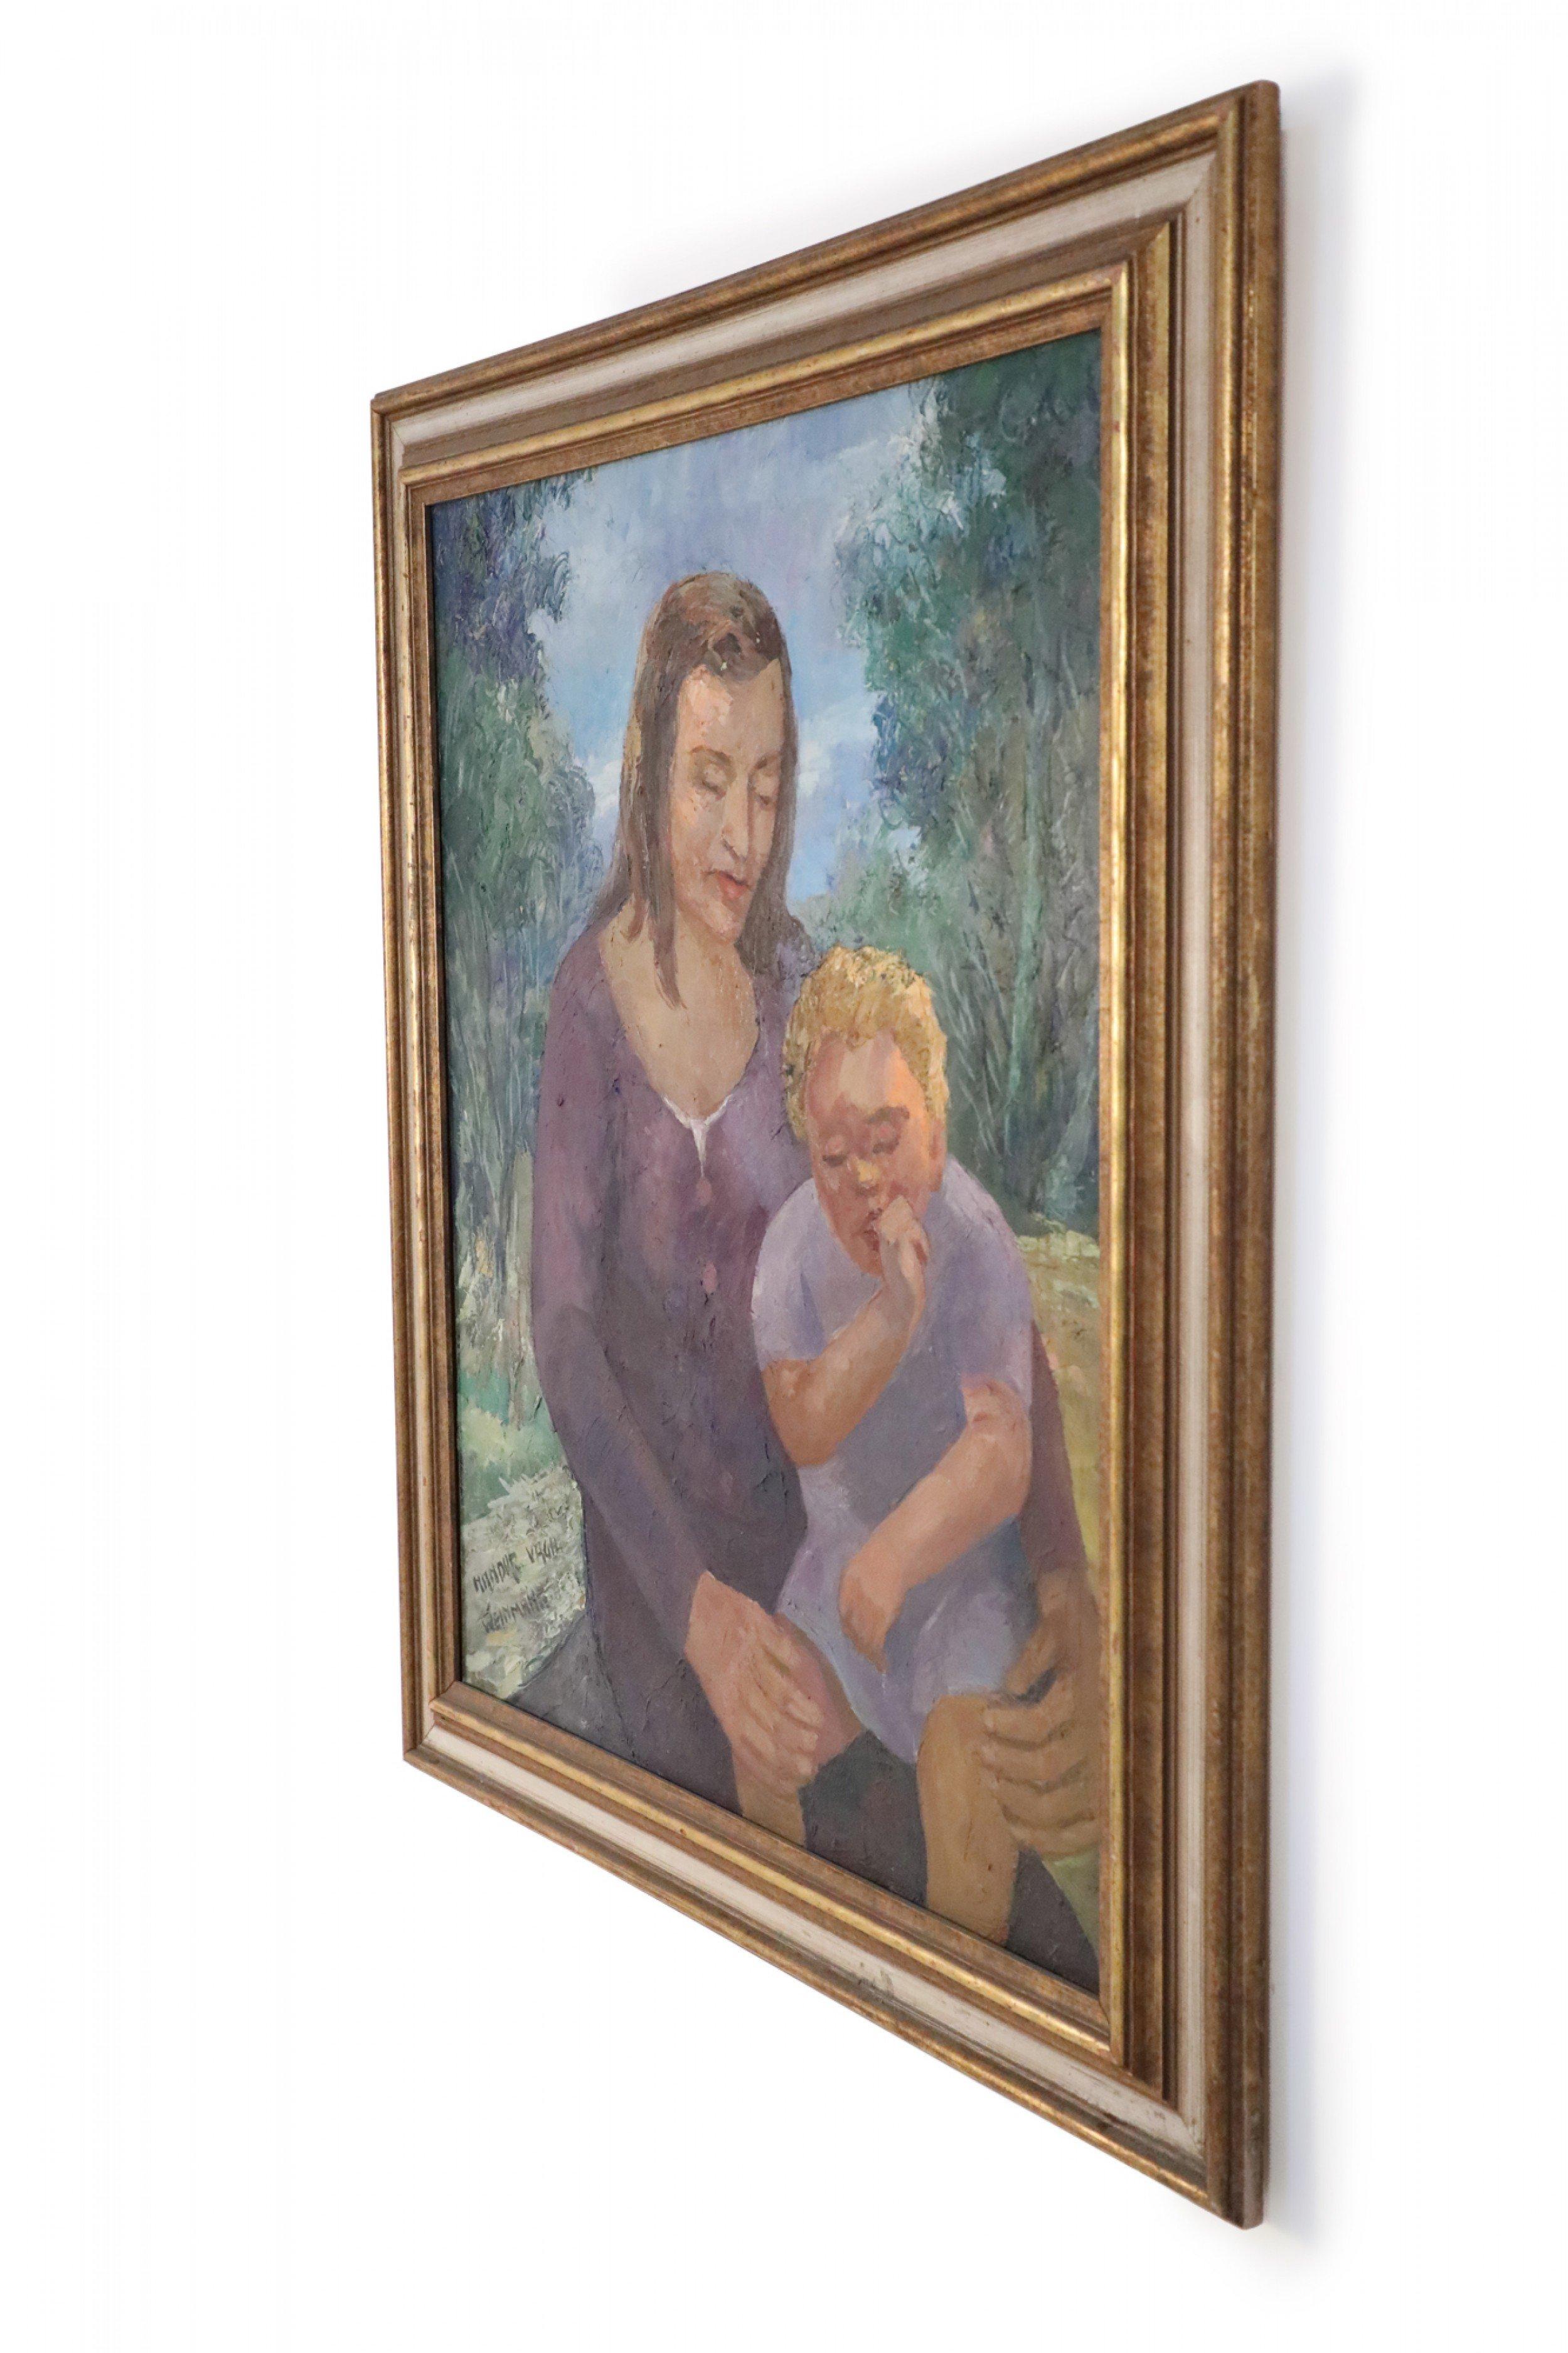 Vintage (20th century) oil painting of a woman holding a thumb-sucking child on her knee, against a nature-filled background, in a rectangular, giltwood frame.
   